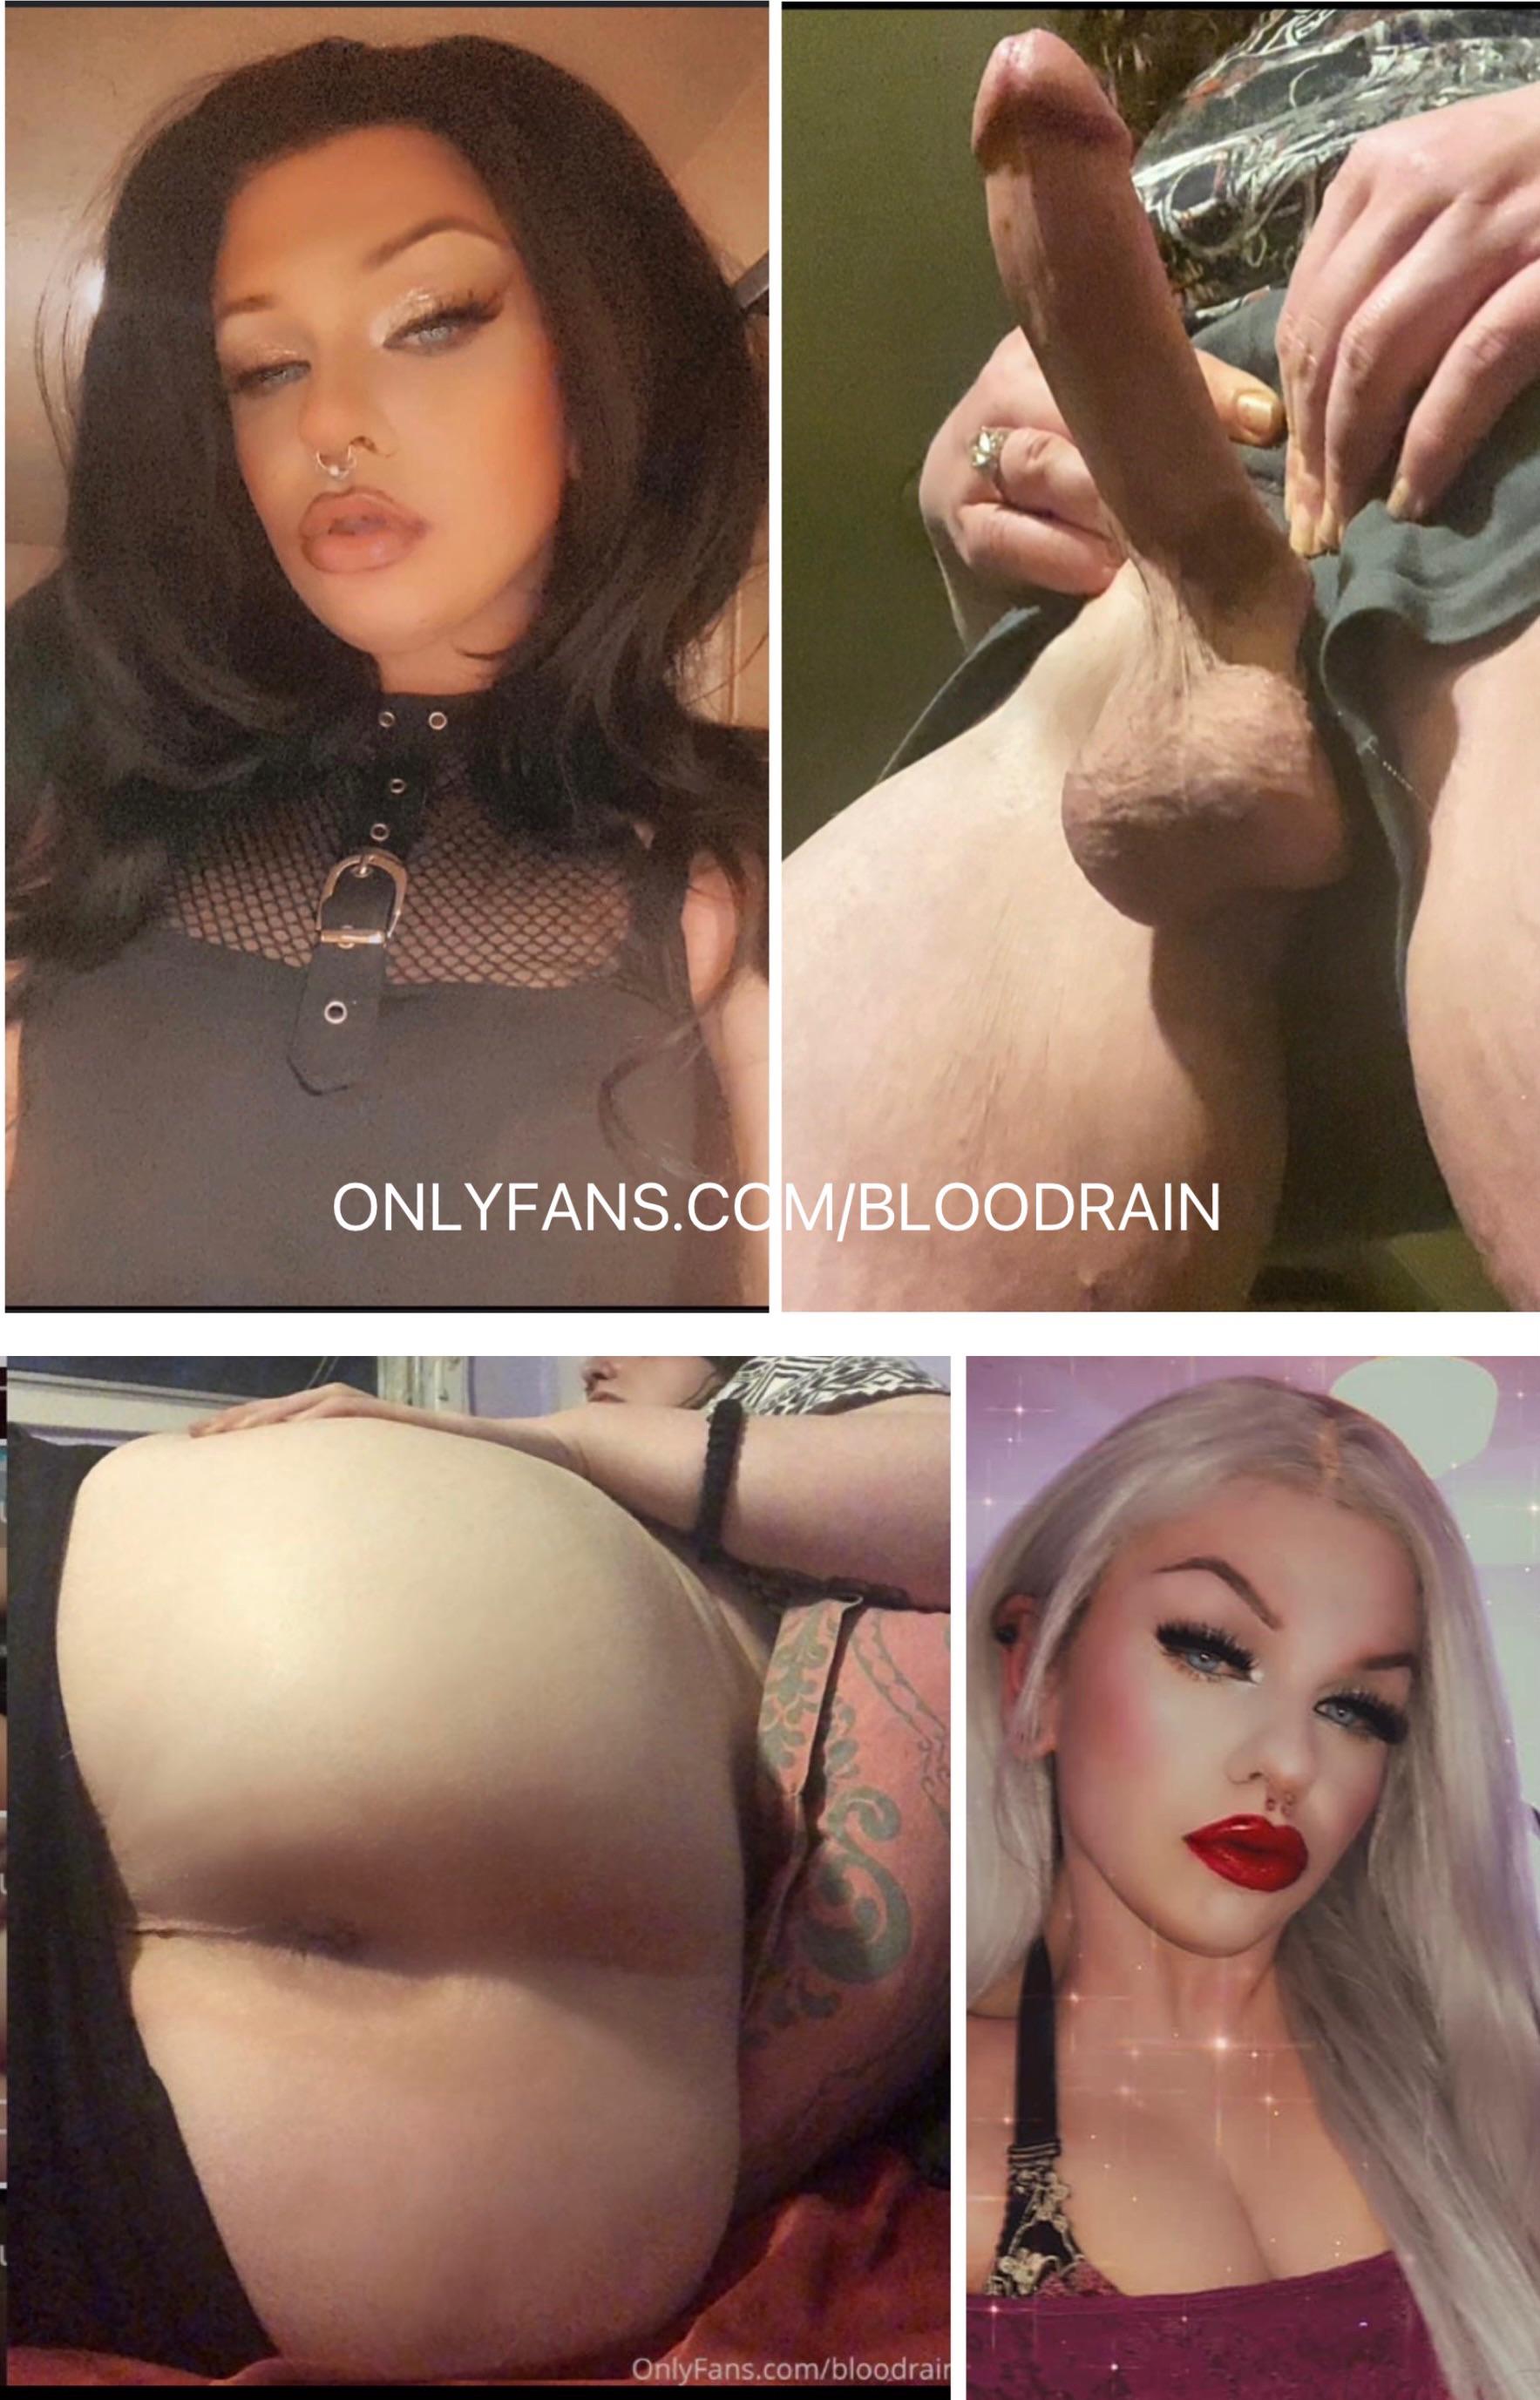 Do you want to fuck me as a blonde or a brunette? I can be anything you like - ur little fuckdoll 😈🖤 11036qj - transexual woman